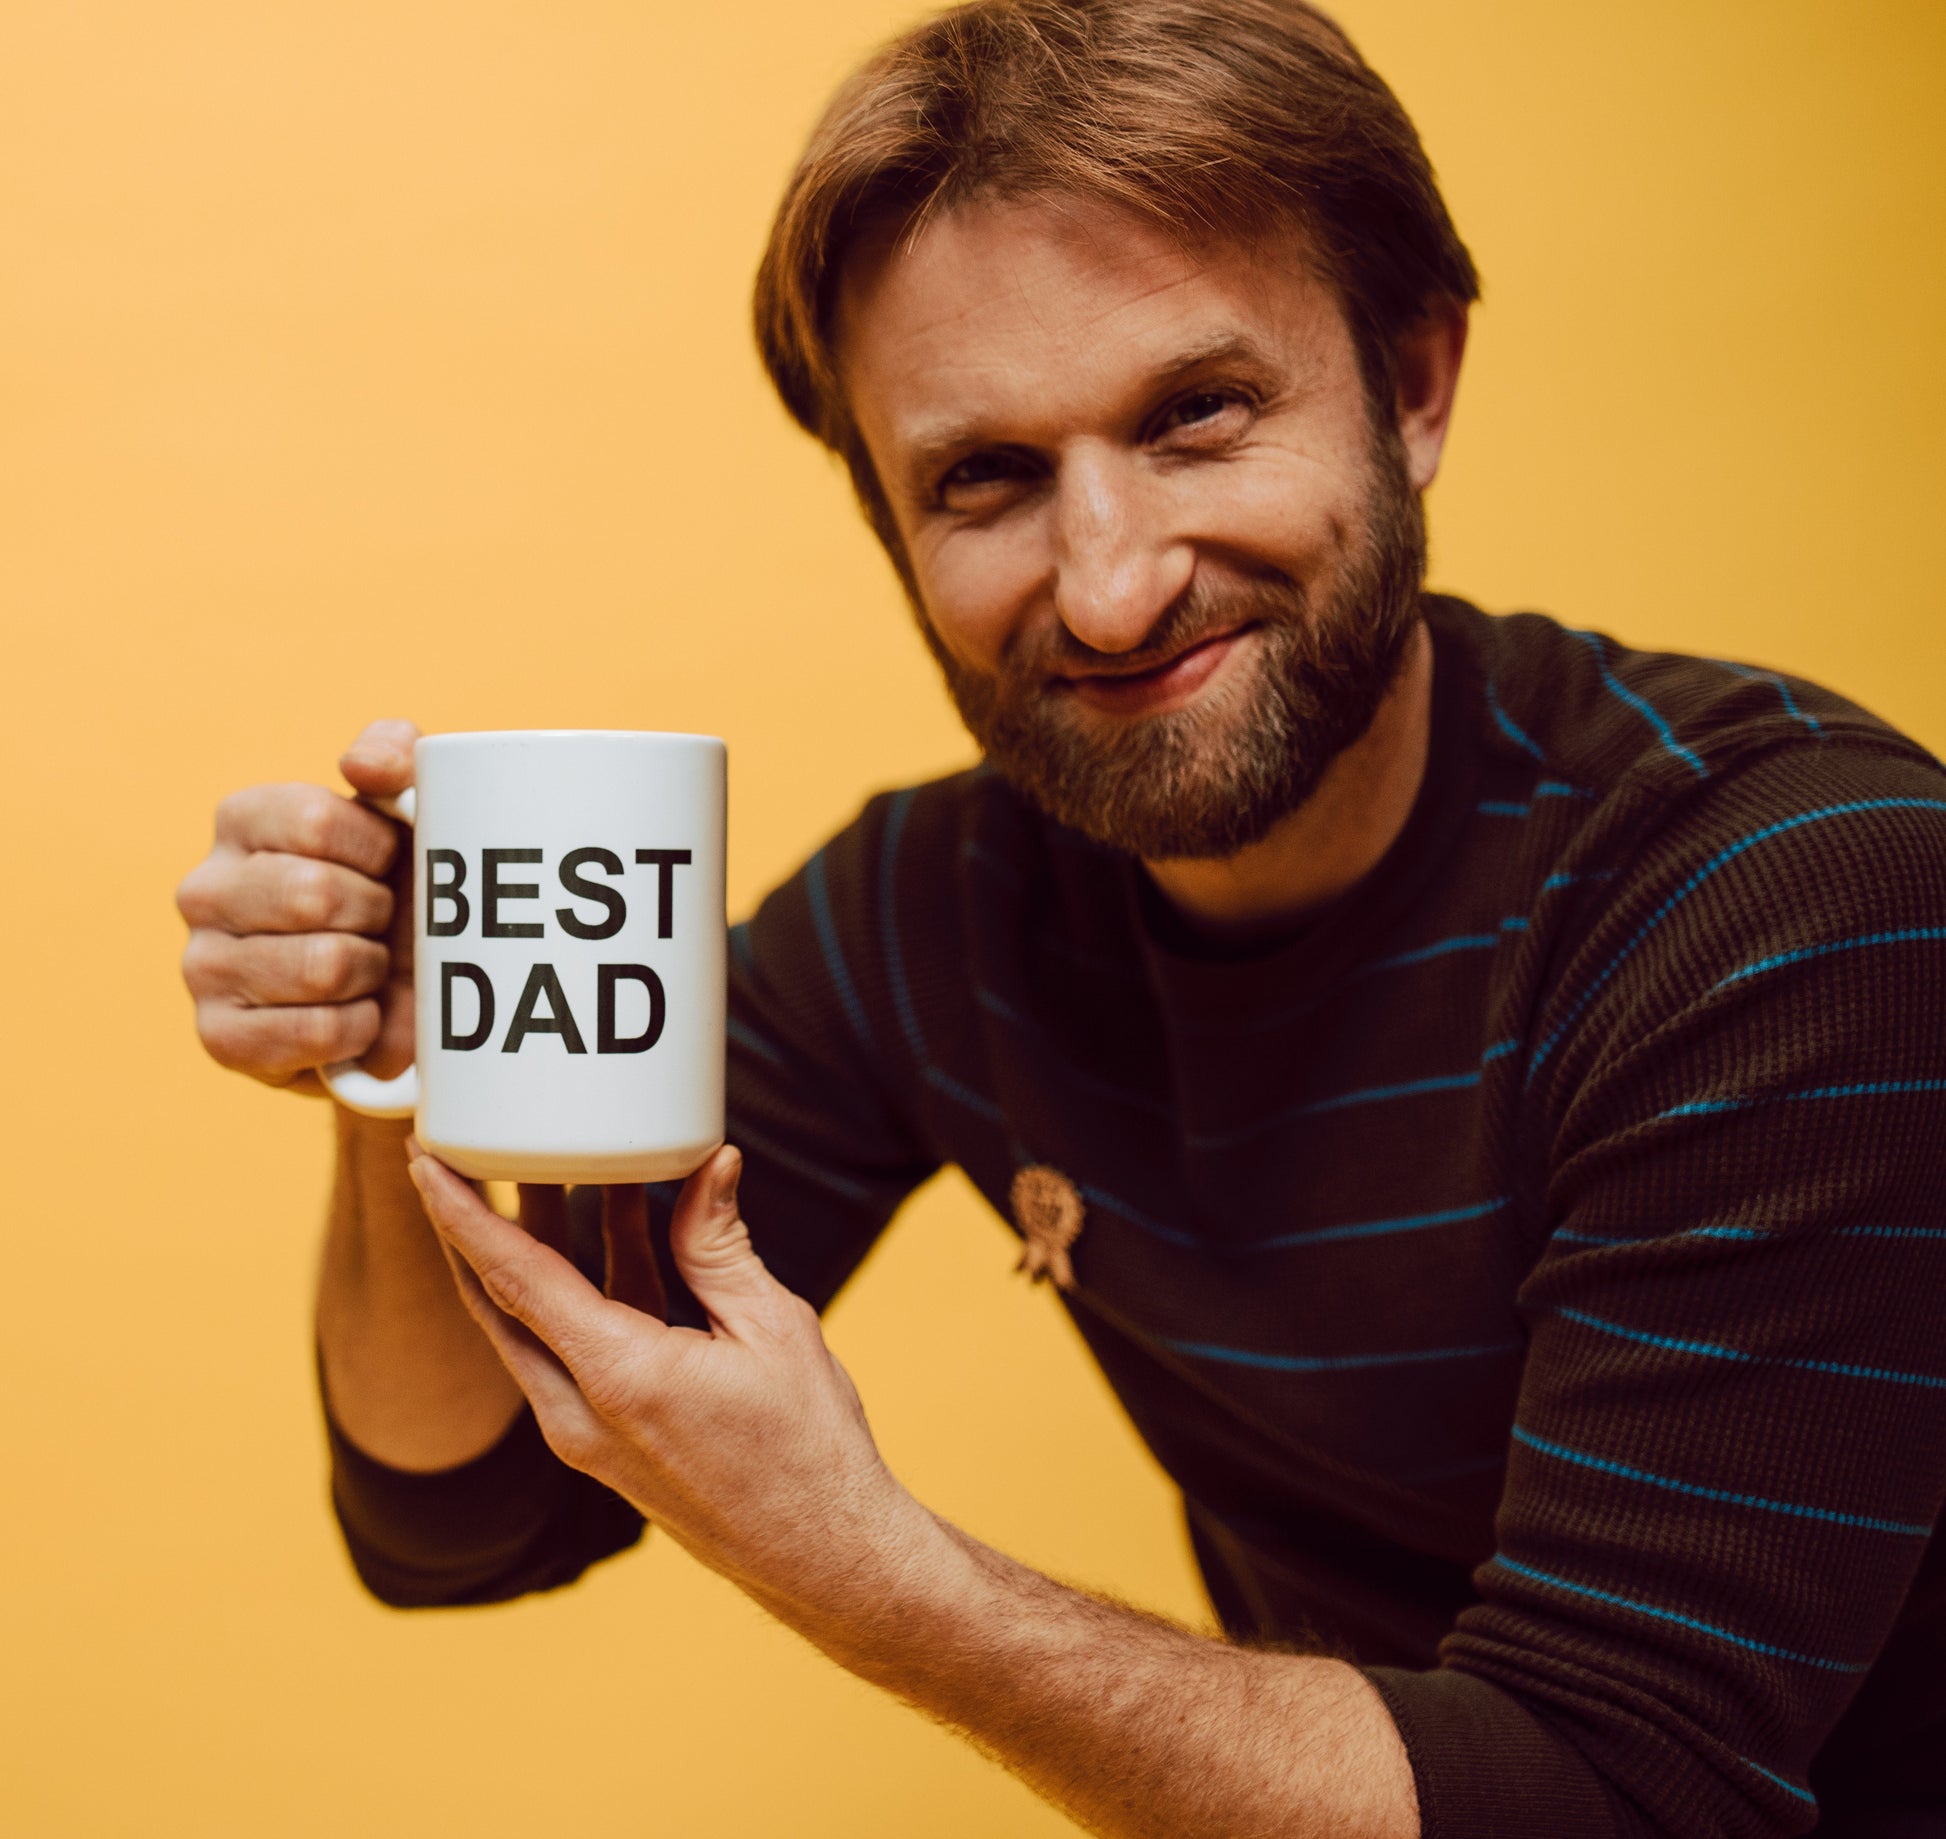 You can have your very own mug, just the way you like it. Simply email us a photo of the image you would like printed on the mugs. Ensure the quality of the photo is HD (1080p is recommended).  We will use your image, print it on a mug, and have it ready for you within two weeks! 